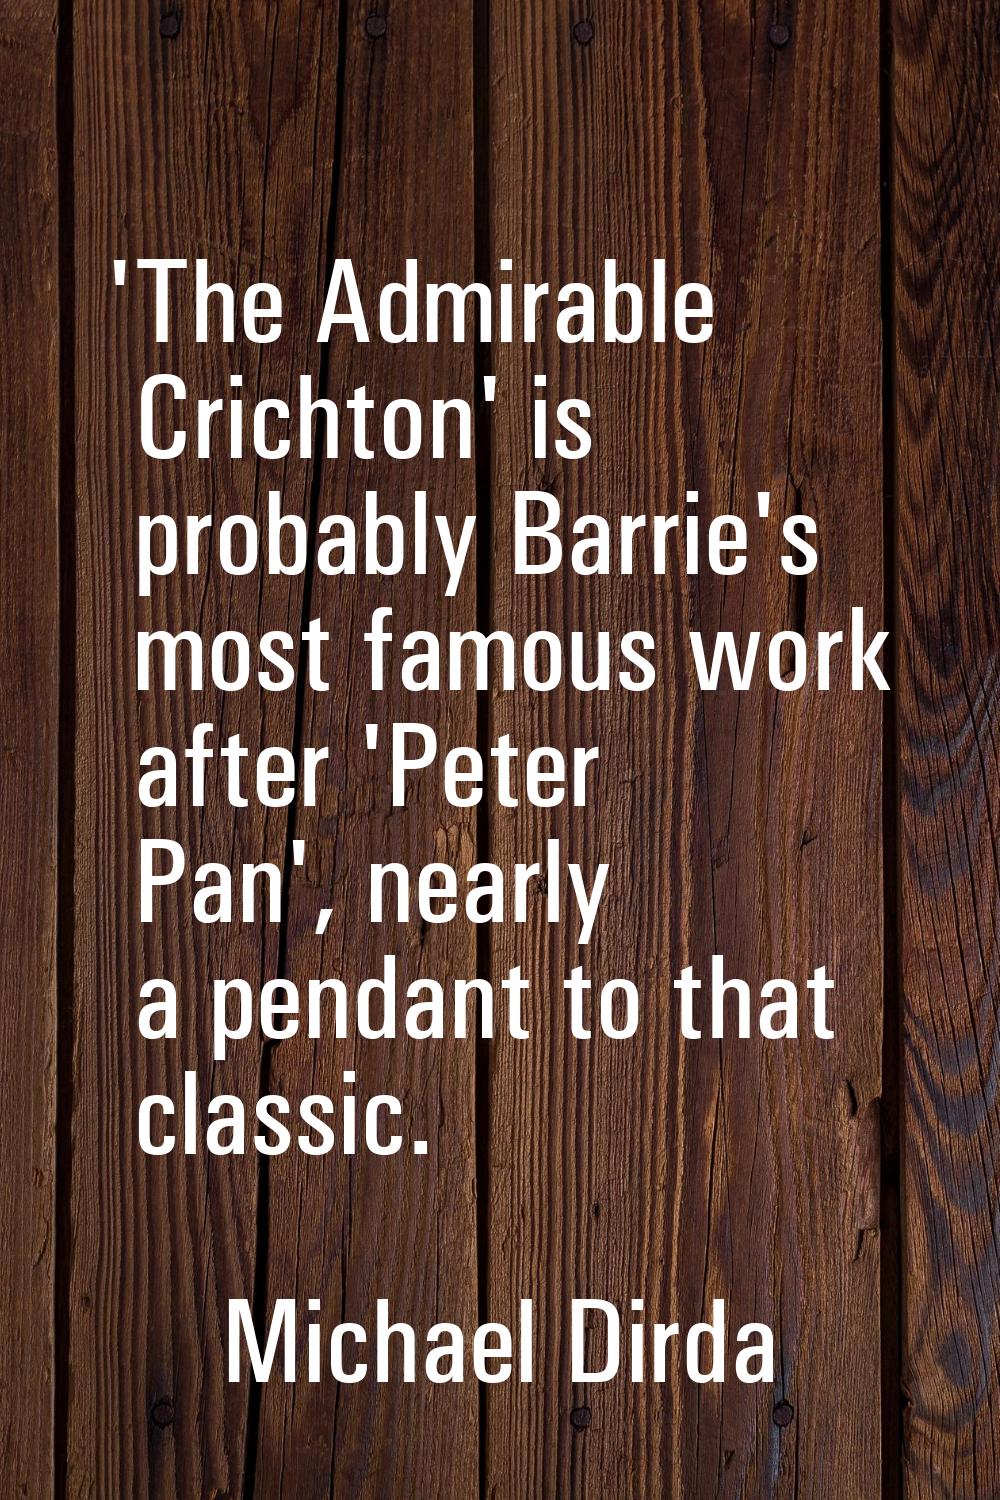 'The Admirable Crichton' is probably Barrie's most famous work after 'Peter Pan', nearly a pendant 